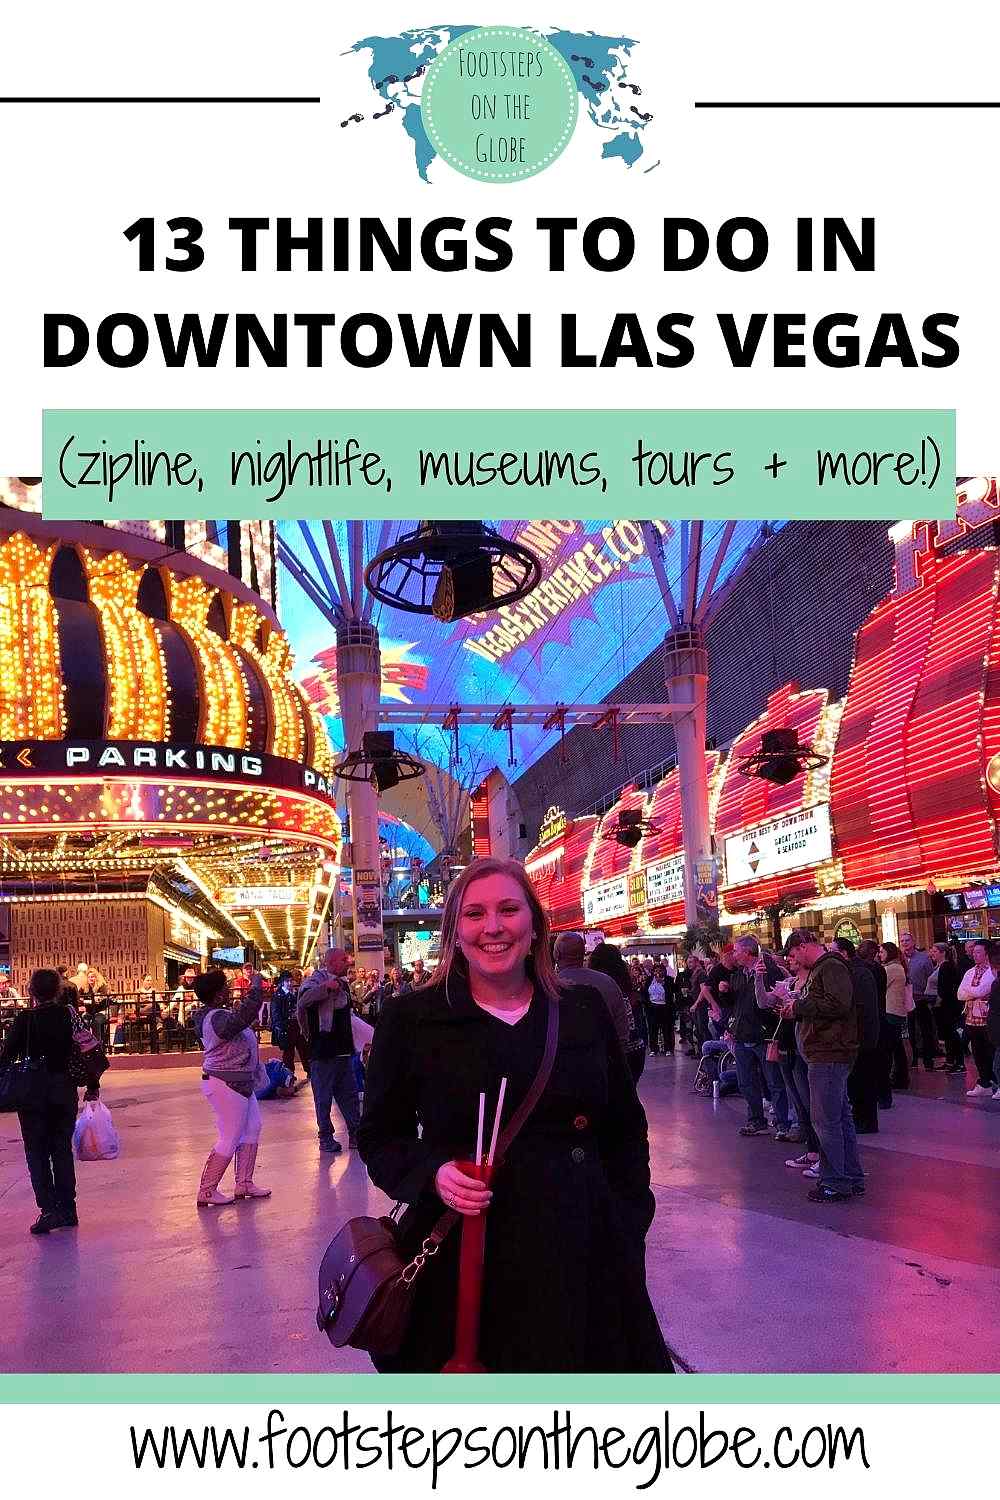 Pinterest image of Mel holding a yard drink wearing a black coat down Fremont Street, lit up with lots of lights with the text: "13 Things to do in Downtown Las Vegas (zipline, museums, tours + more!)"